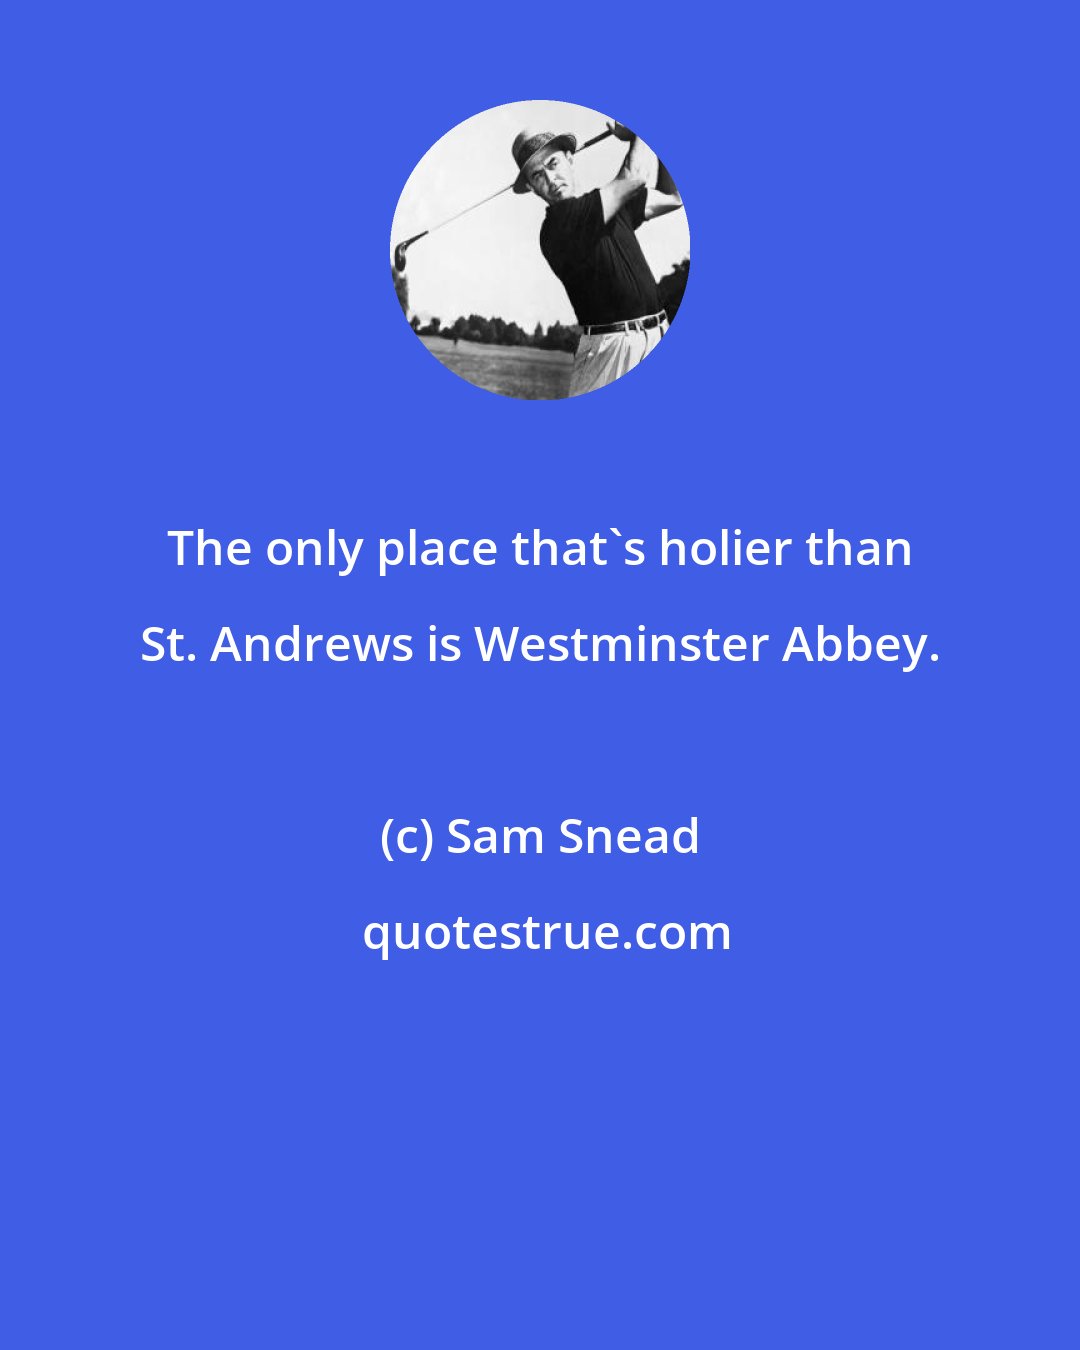 Sam Snead: The only place that's holier than St. Andrews is Westminster Abbey.